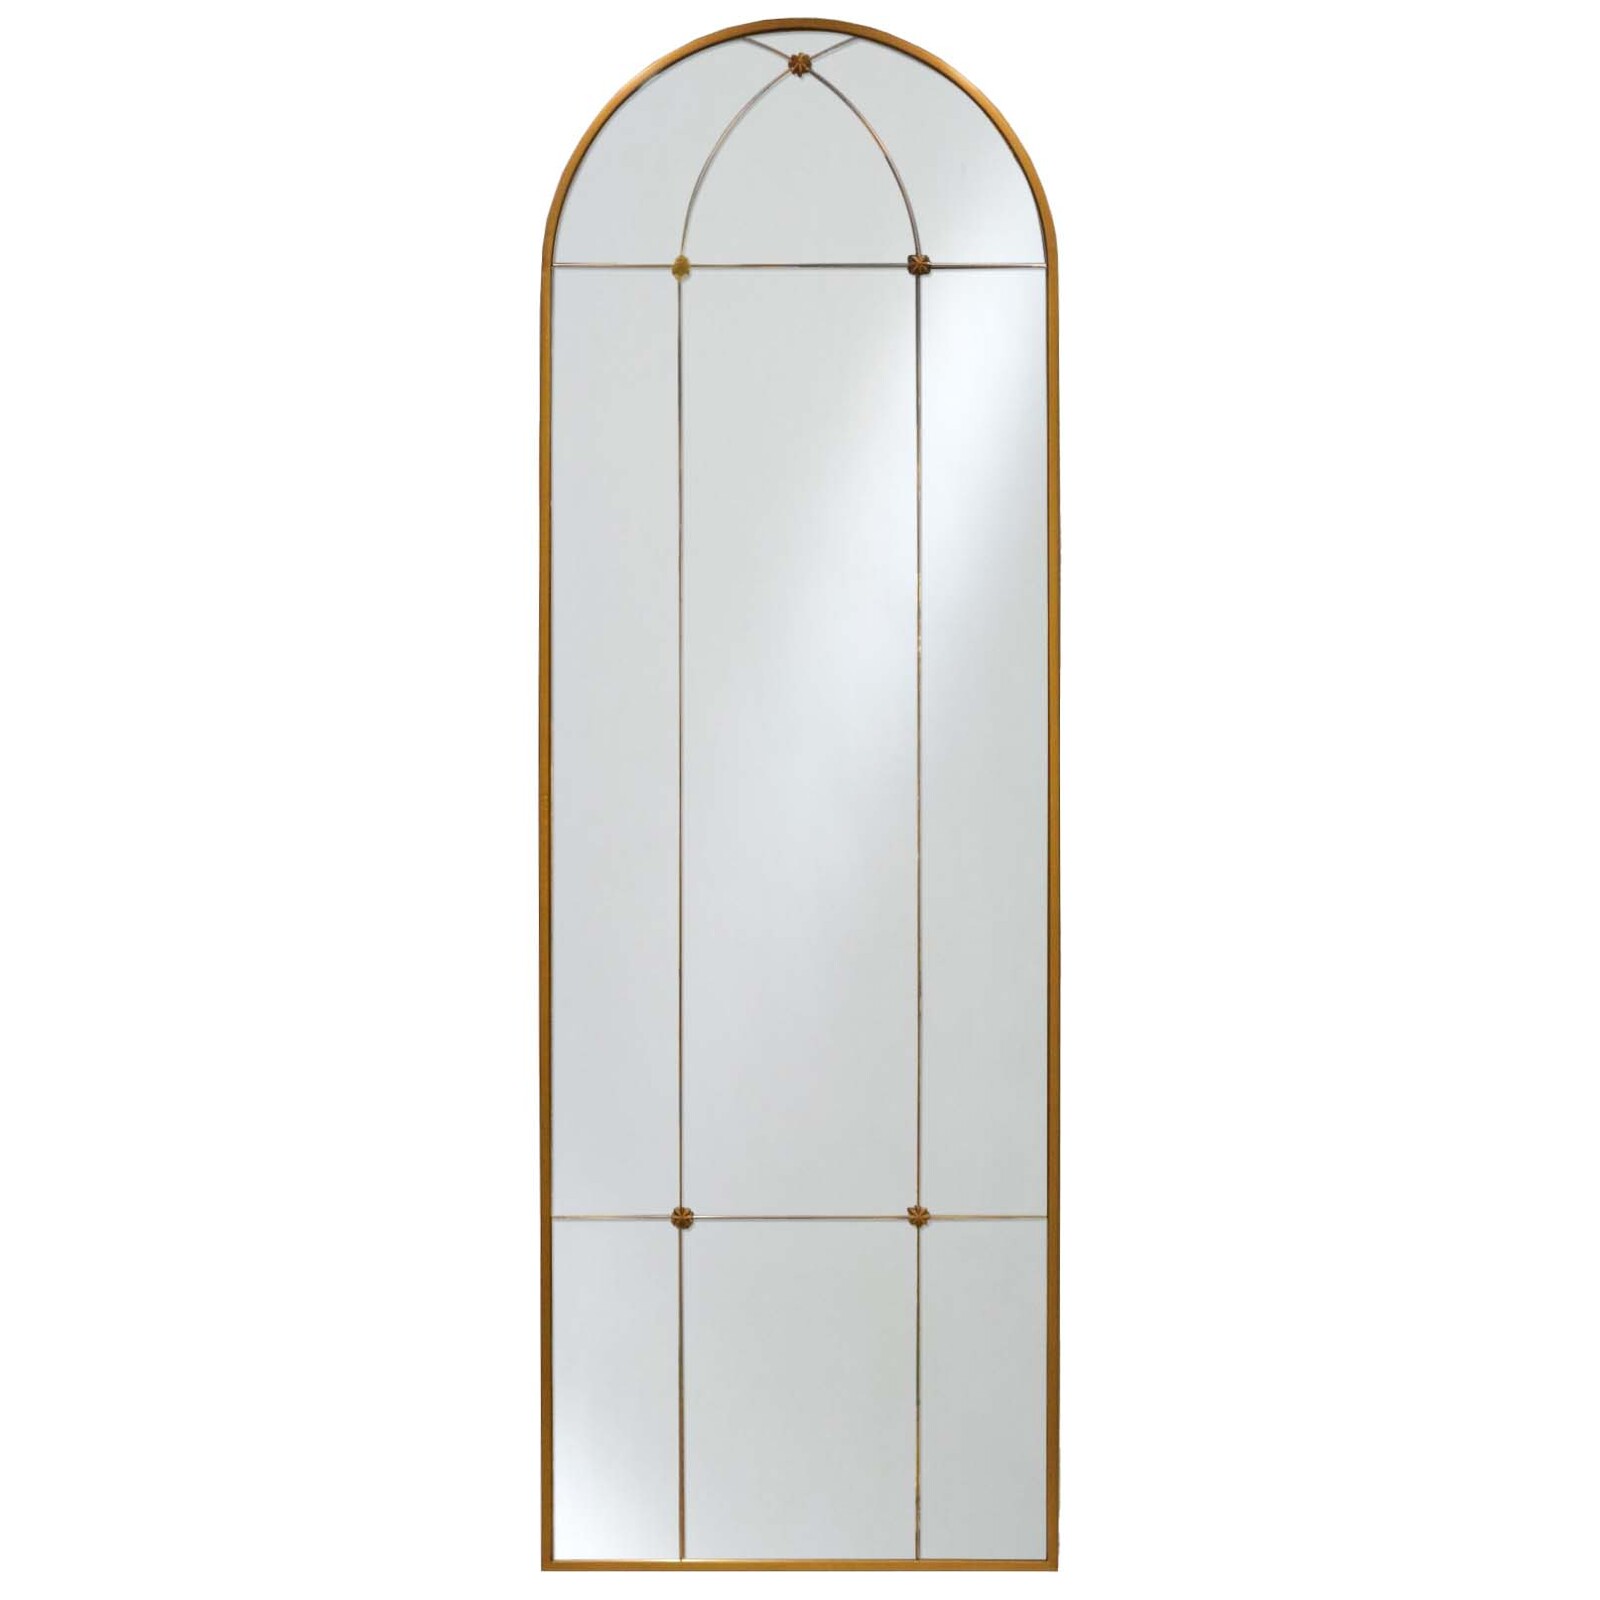 #Mirror Arched Adalene Leaning Floor